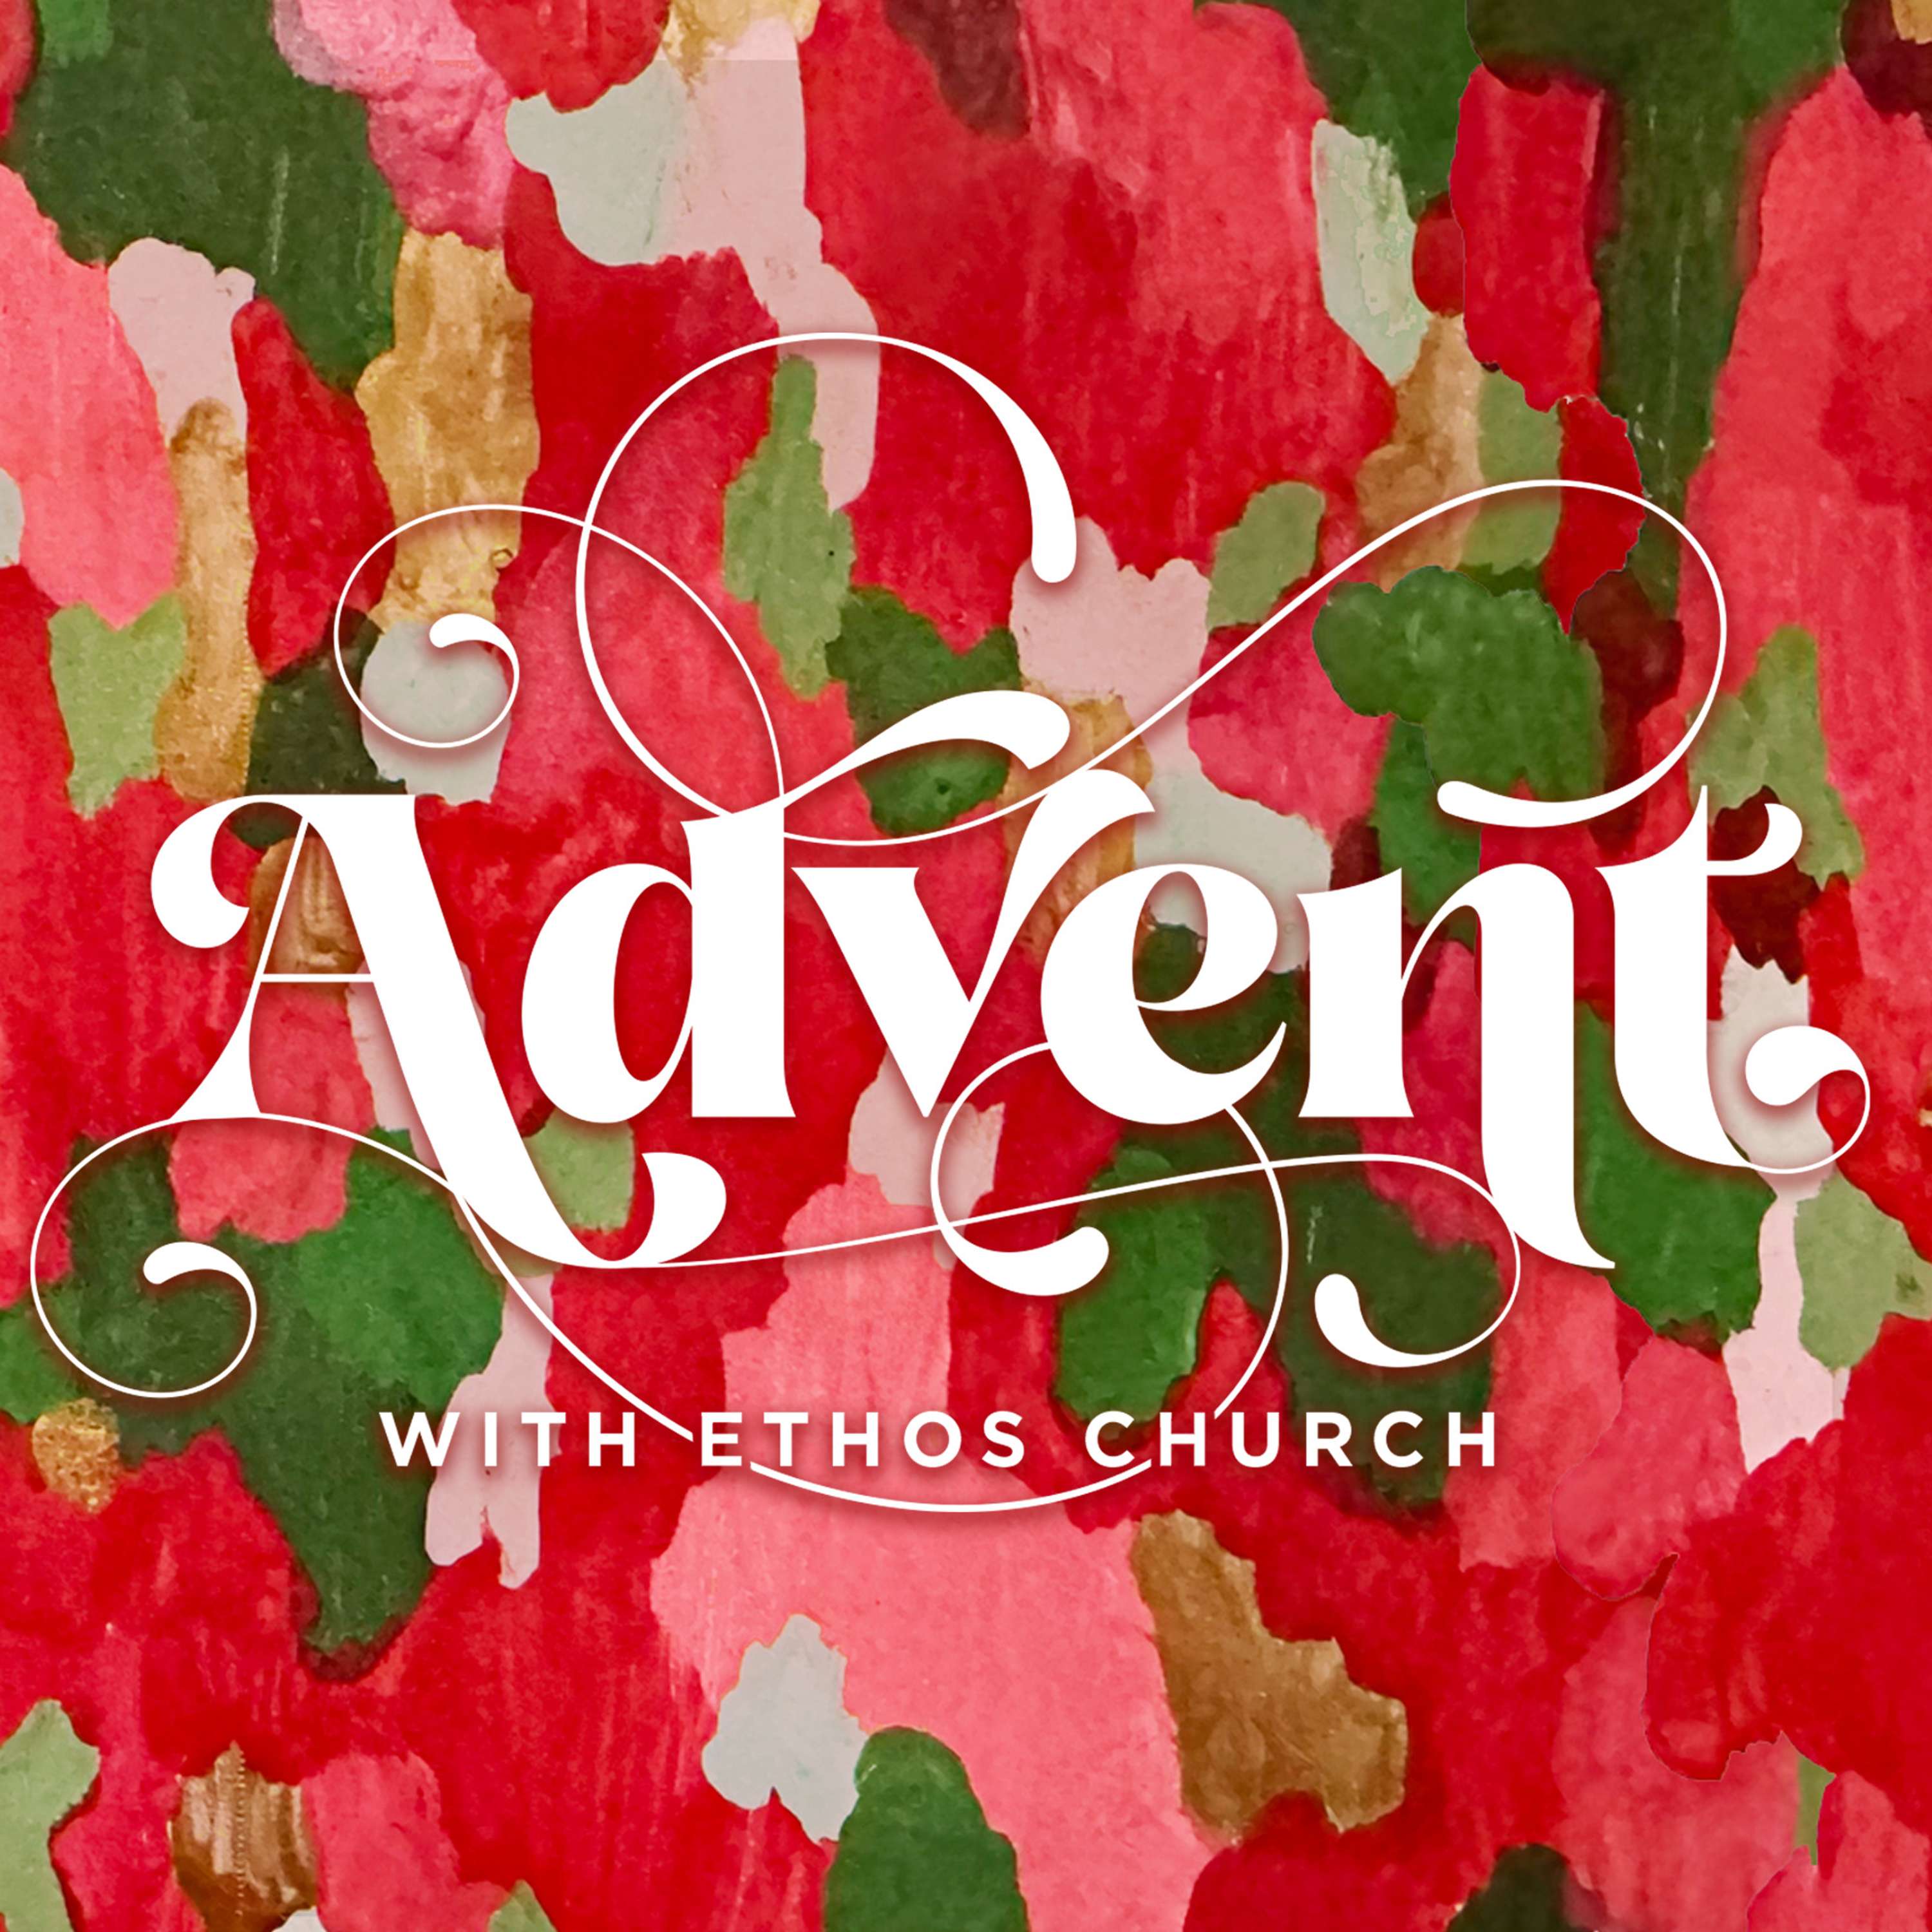 The Songs of Advent: A Song of Trust (Luke 1)